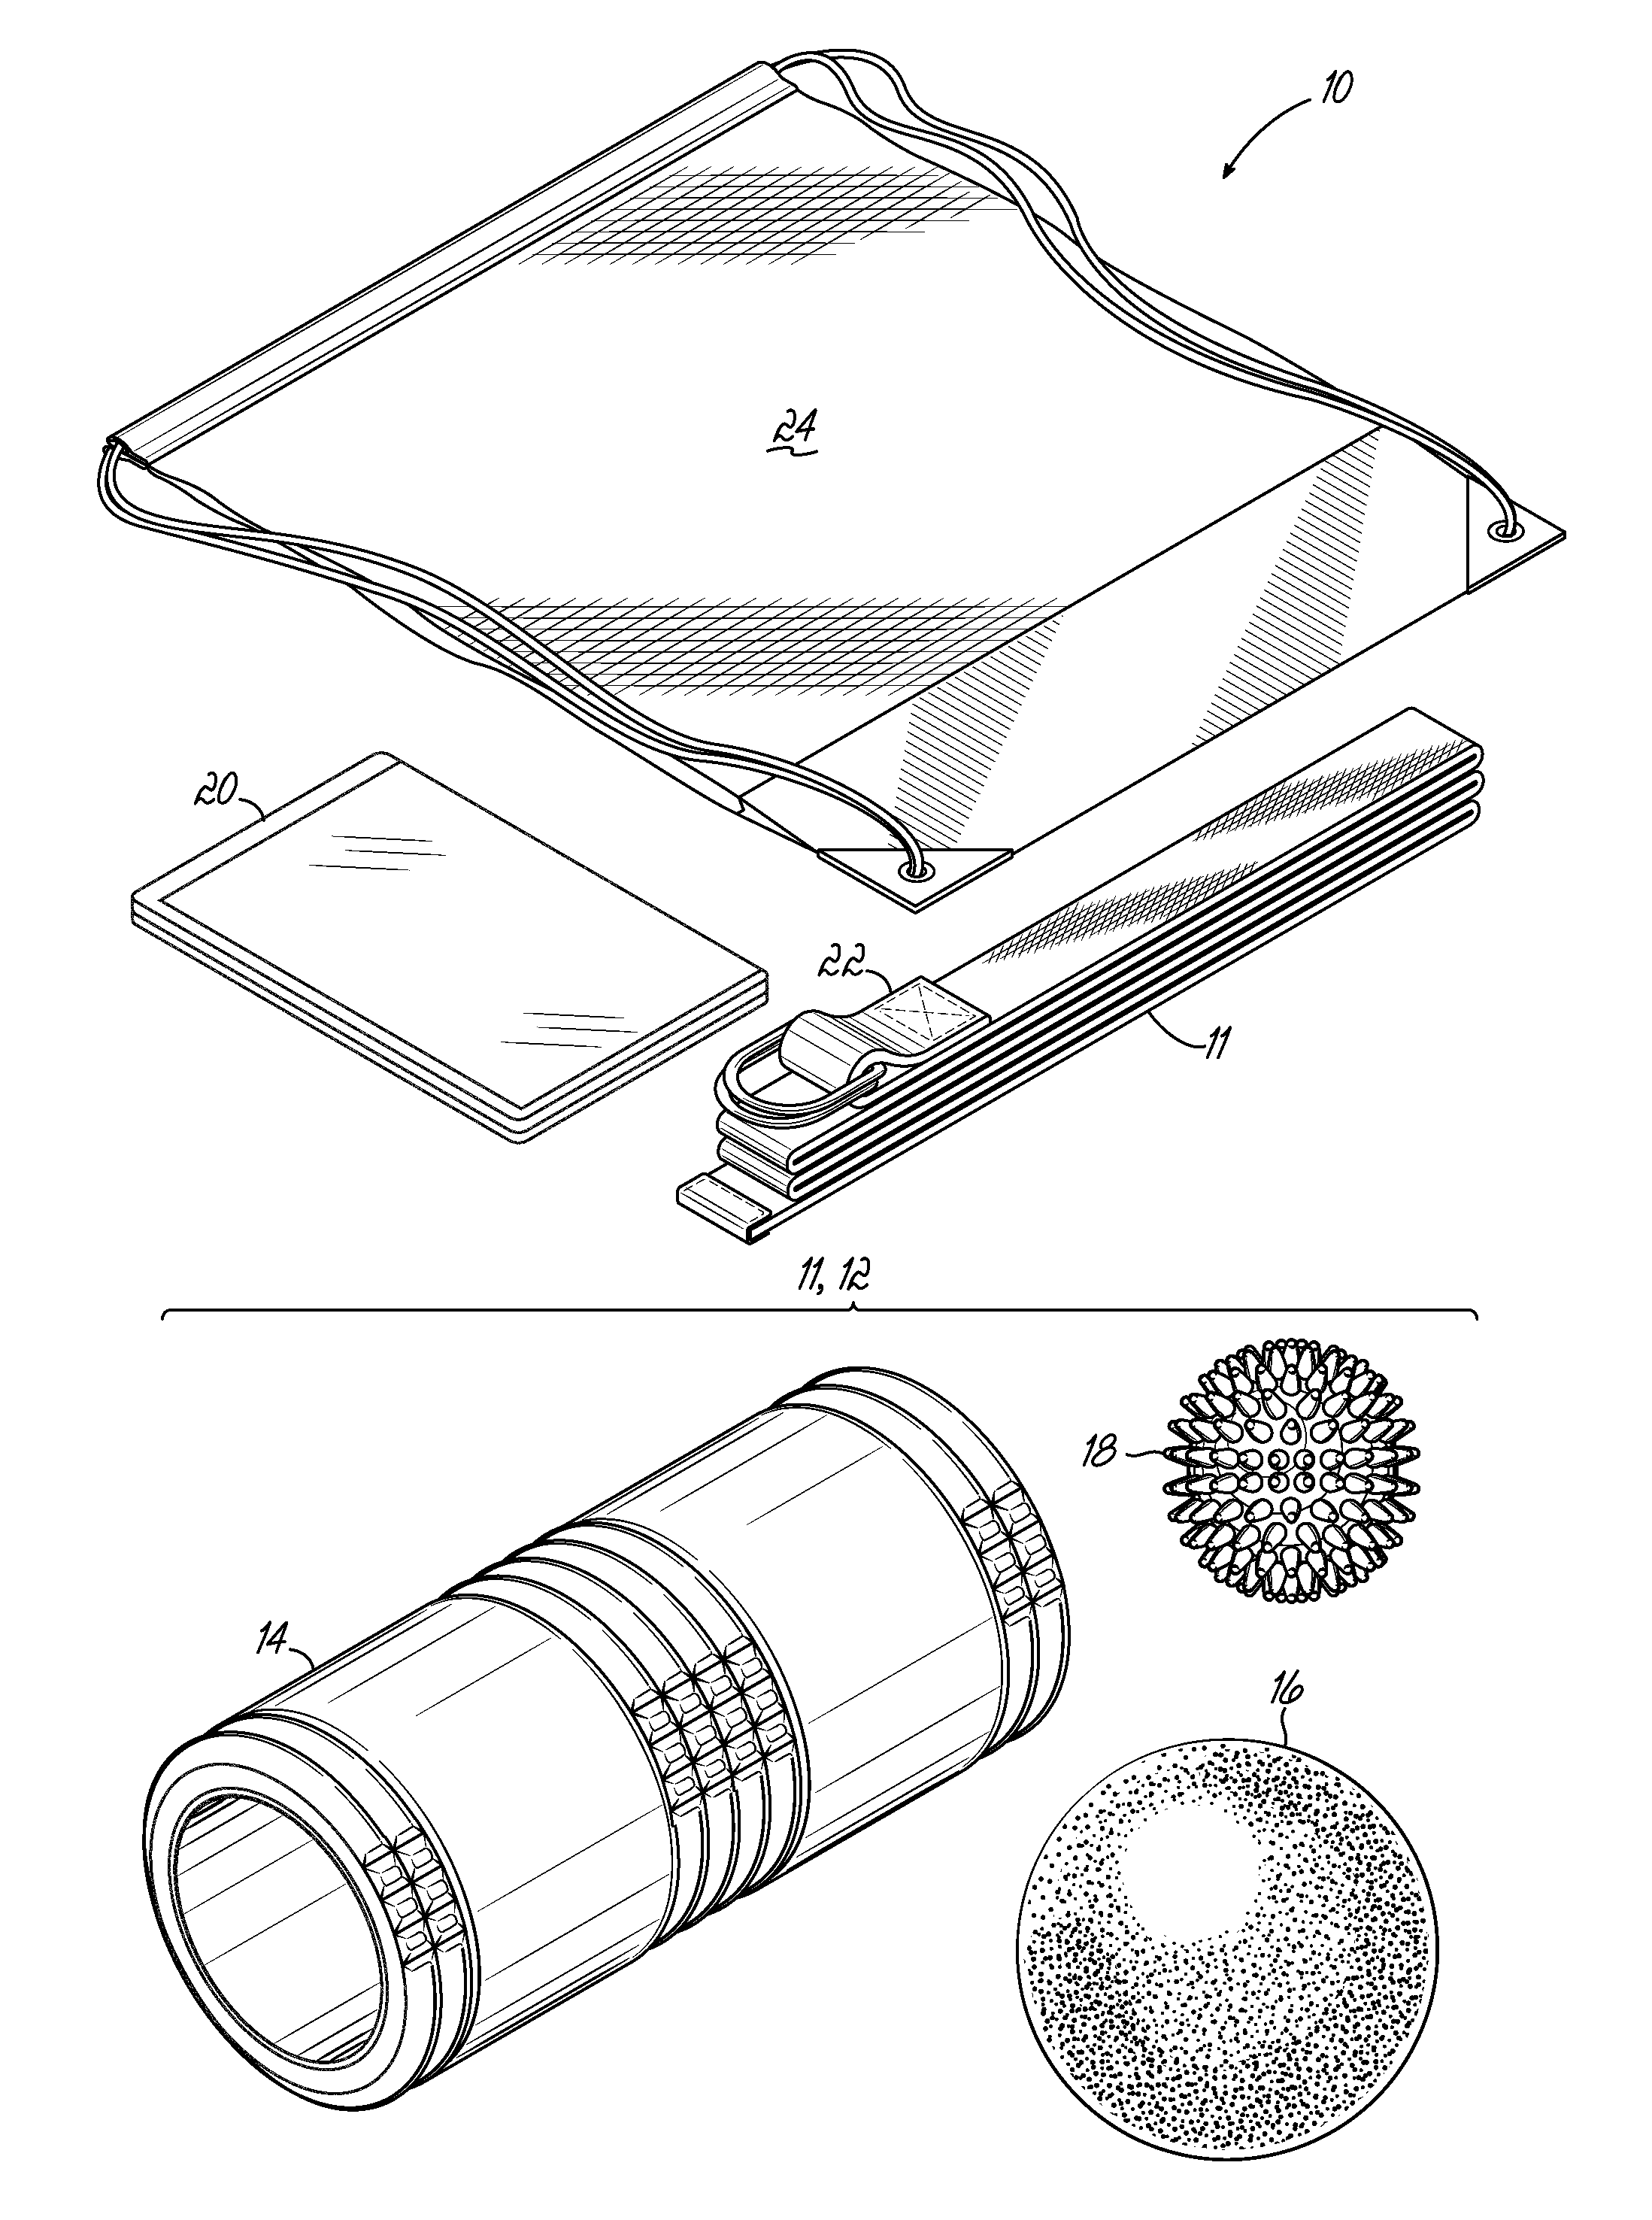 Method for relieving pain and a kit therefor